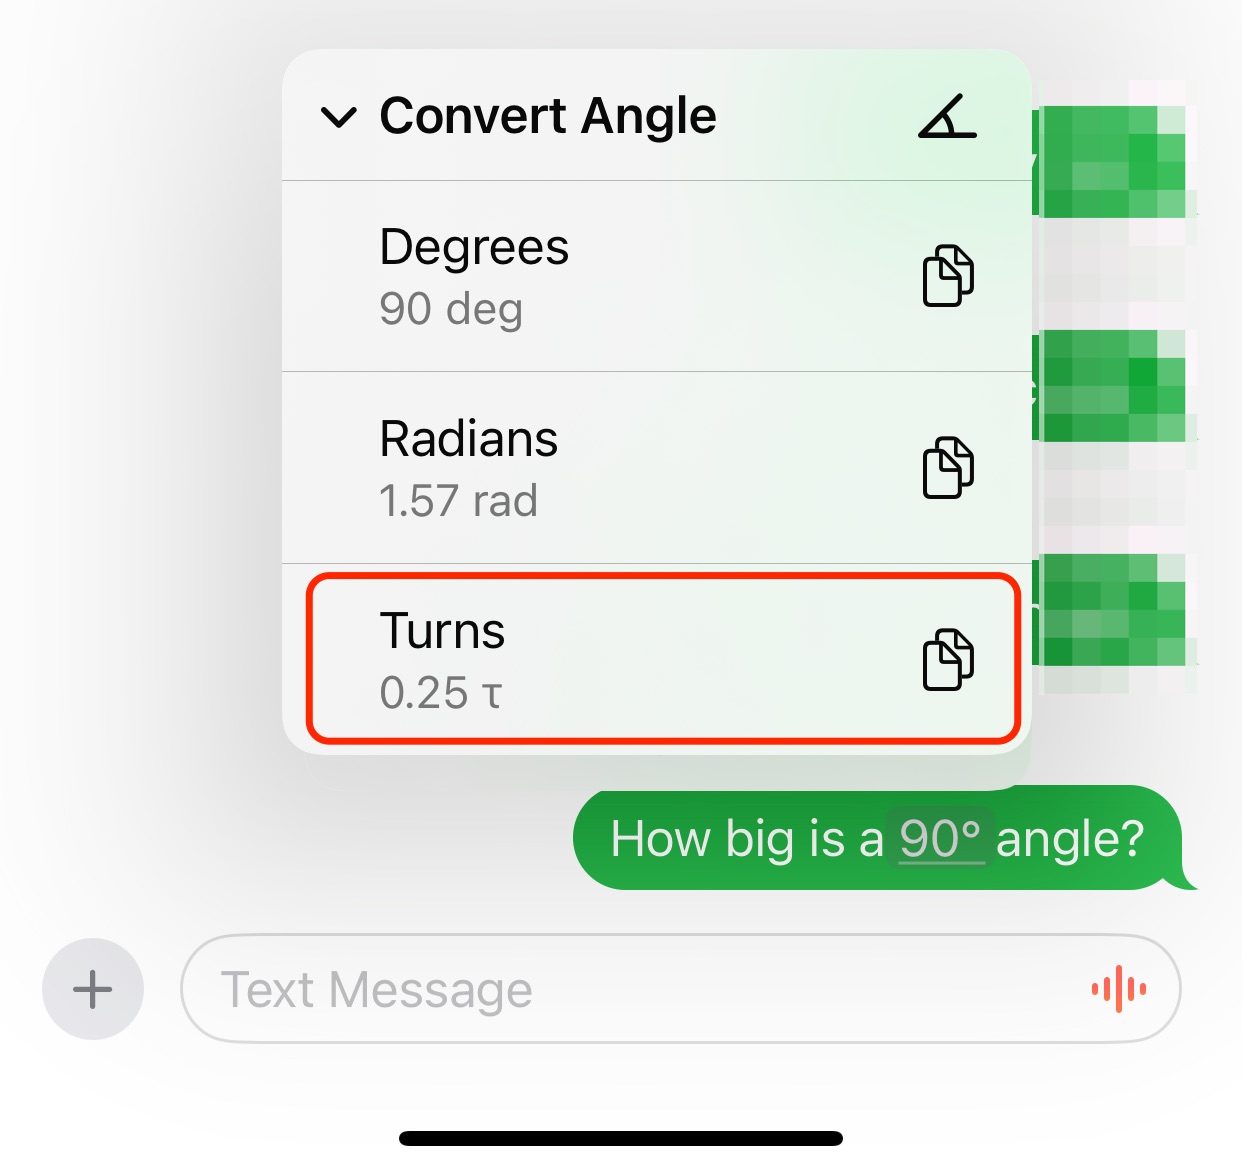 Converting angles to turns in iOS